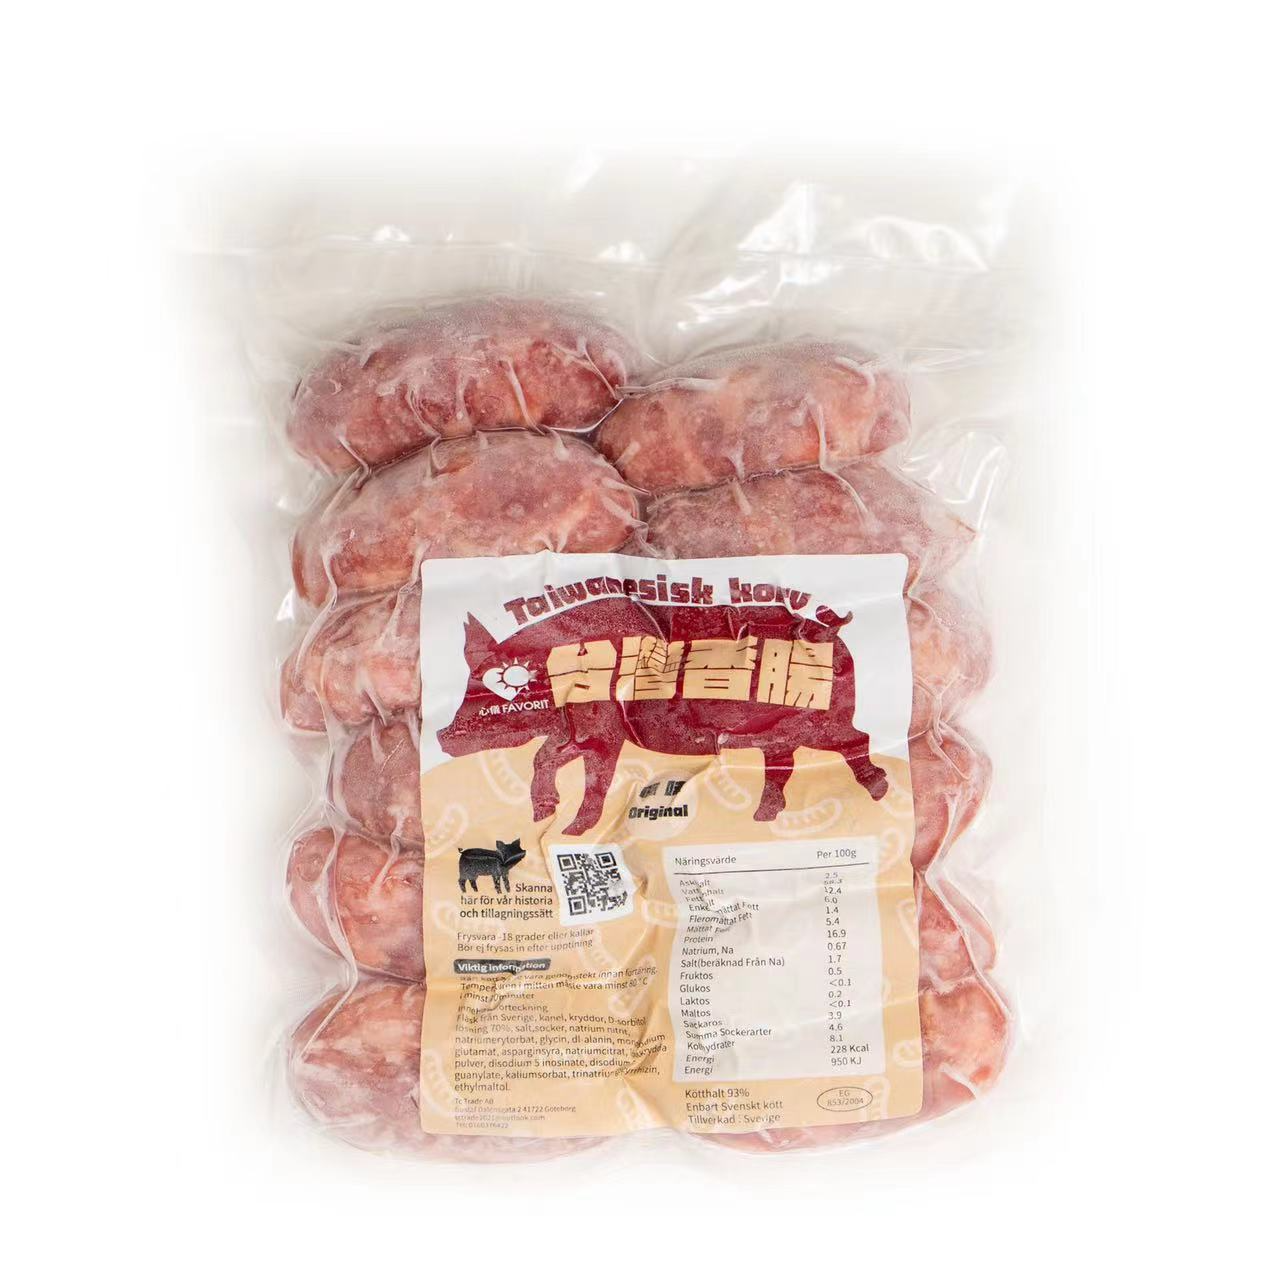 Taiwanese 香肠/香腸 Handmade Sausage, Swedish Pork Frozen approx. 500g Tc Sweden - Recommended!